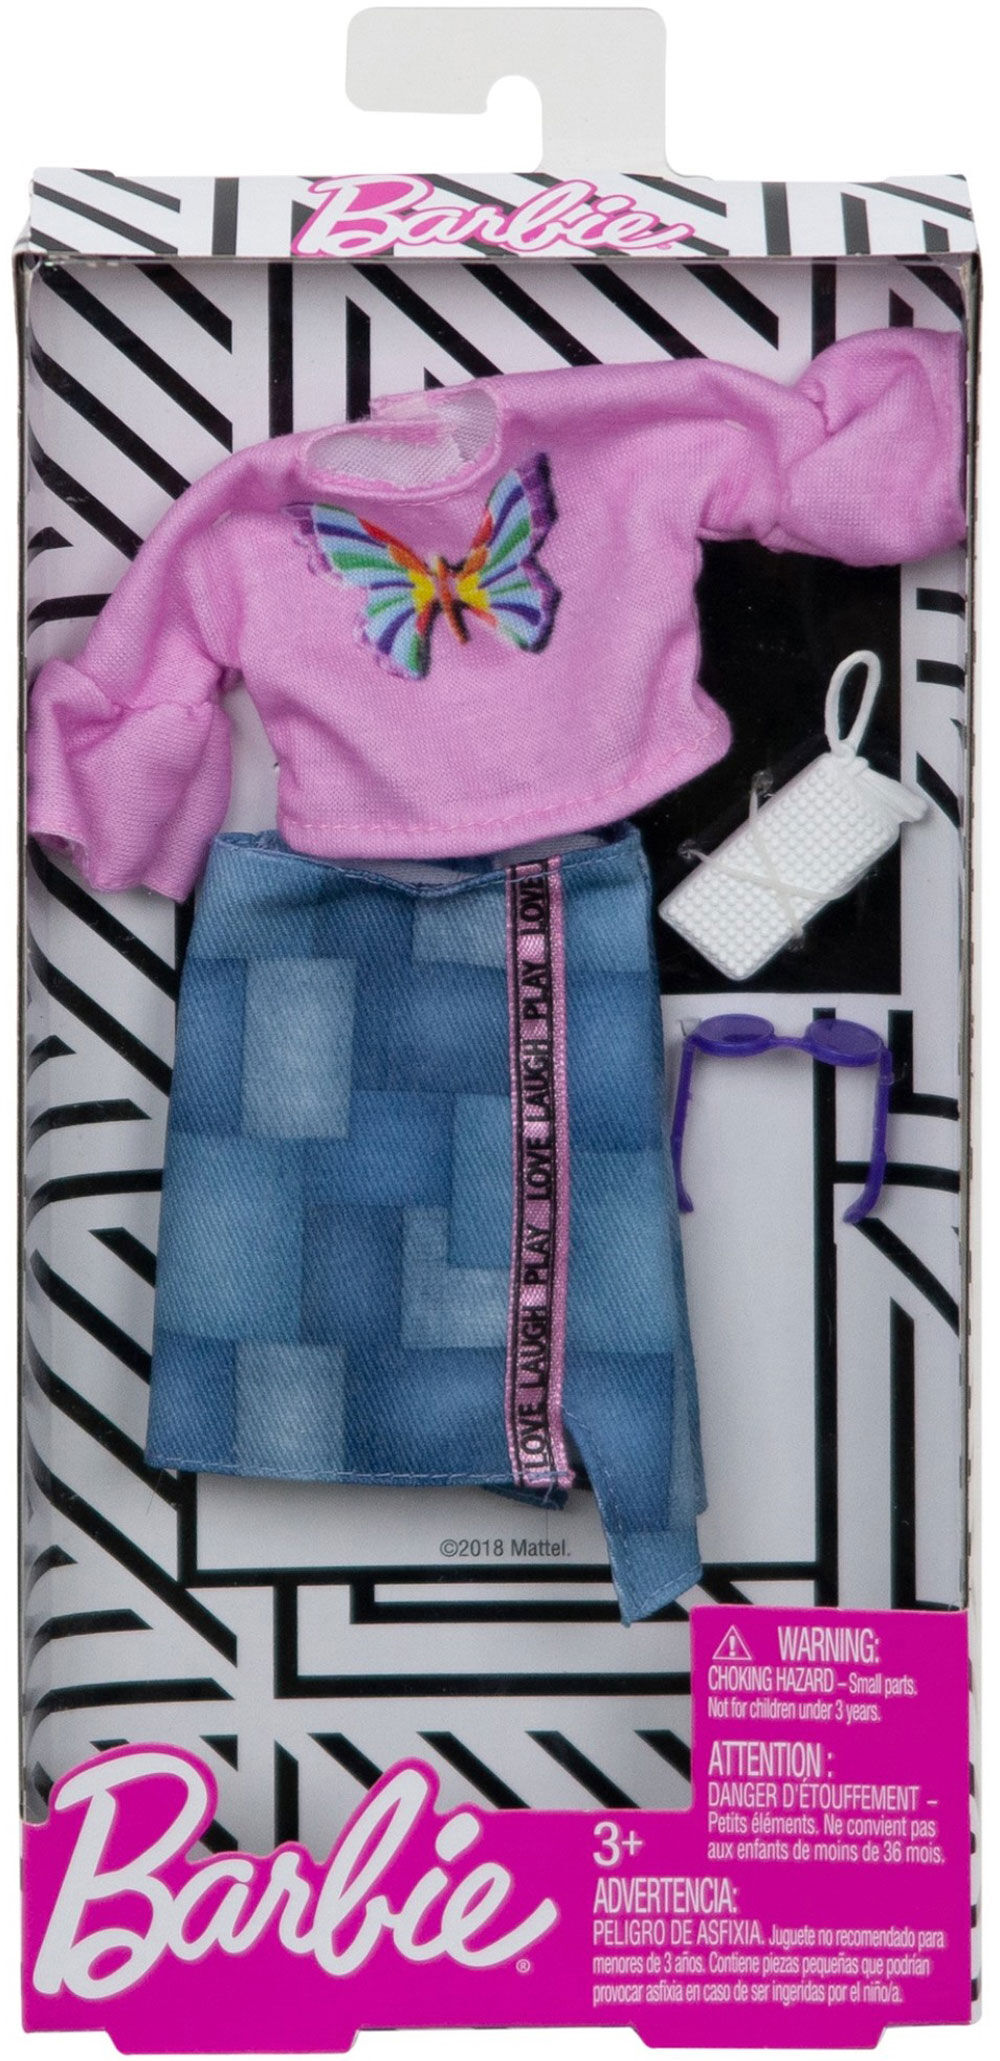 Other Contemp Barbie Clothing Barbie Complete Look Fashion Pack Outfit Butterfly Top Denim Skirt Dolls Bears Sc Uat Com - barbie roblox outfits 2020